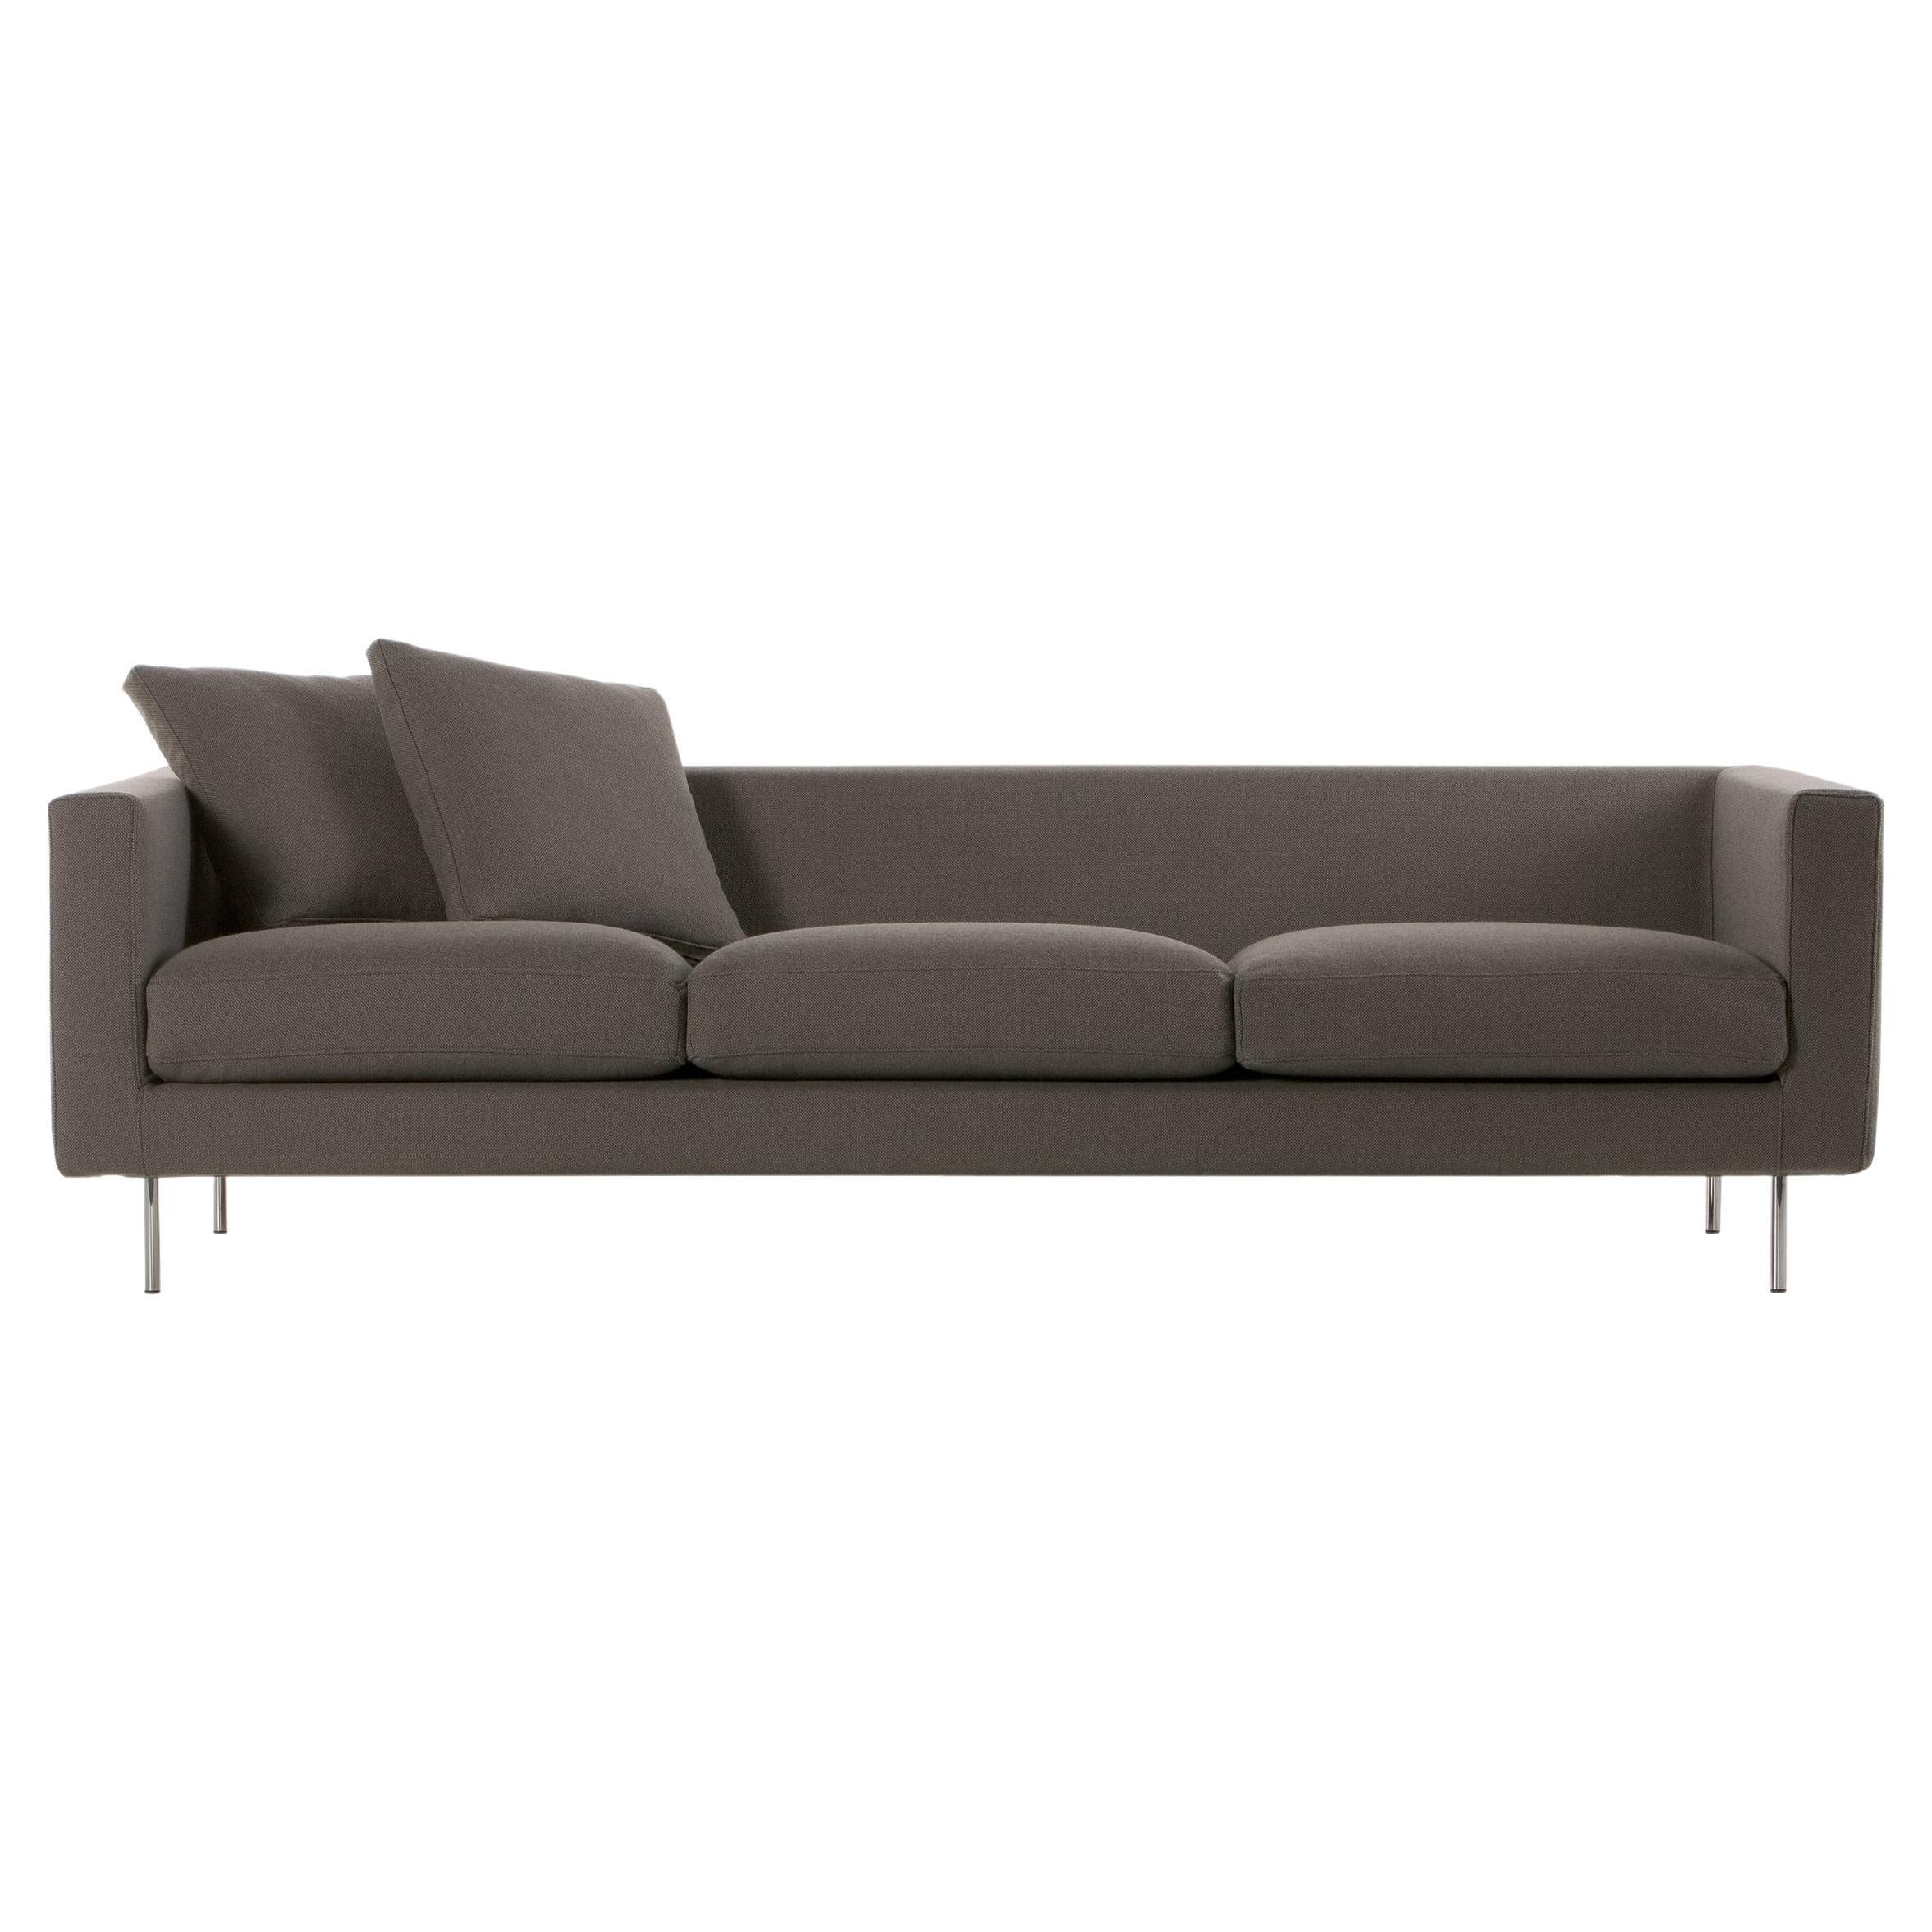 Moooi Boutique 3-Seat Sofa in Hallingdal 65, 390 Upholstery with Heel Legs For Sale